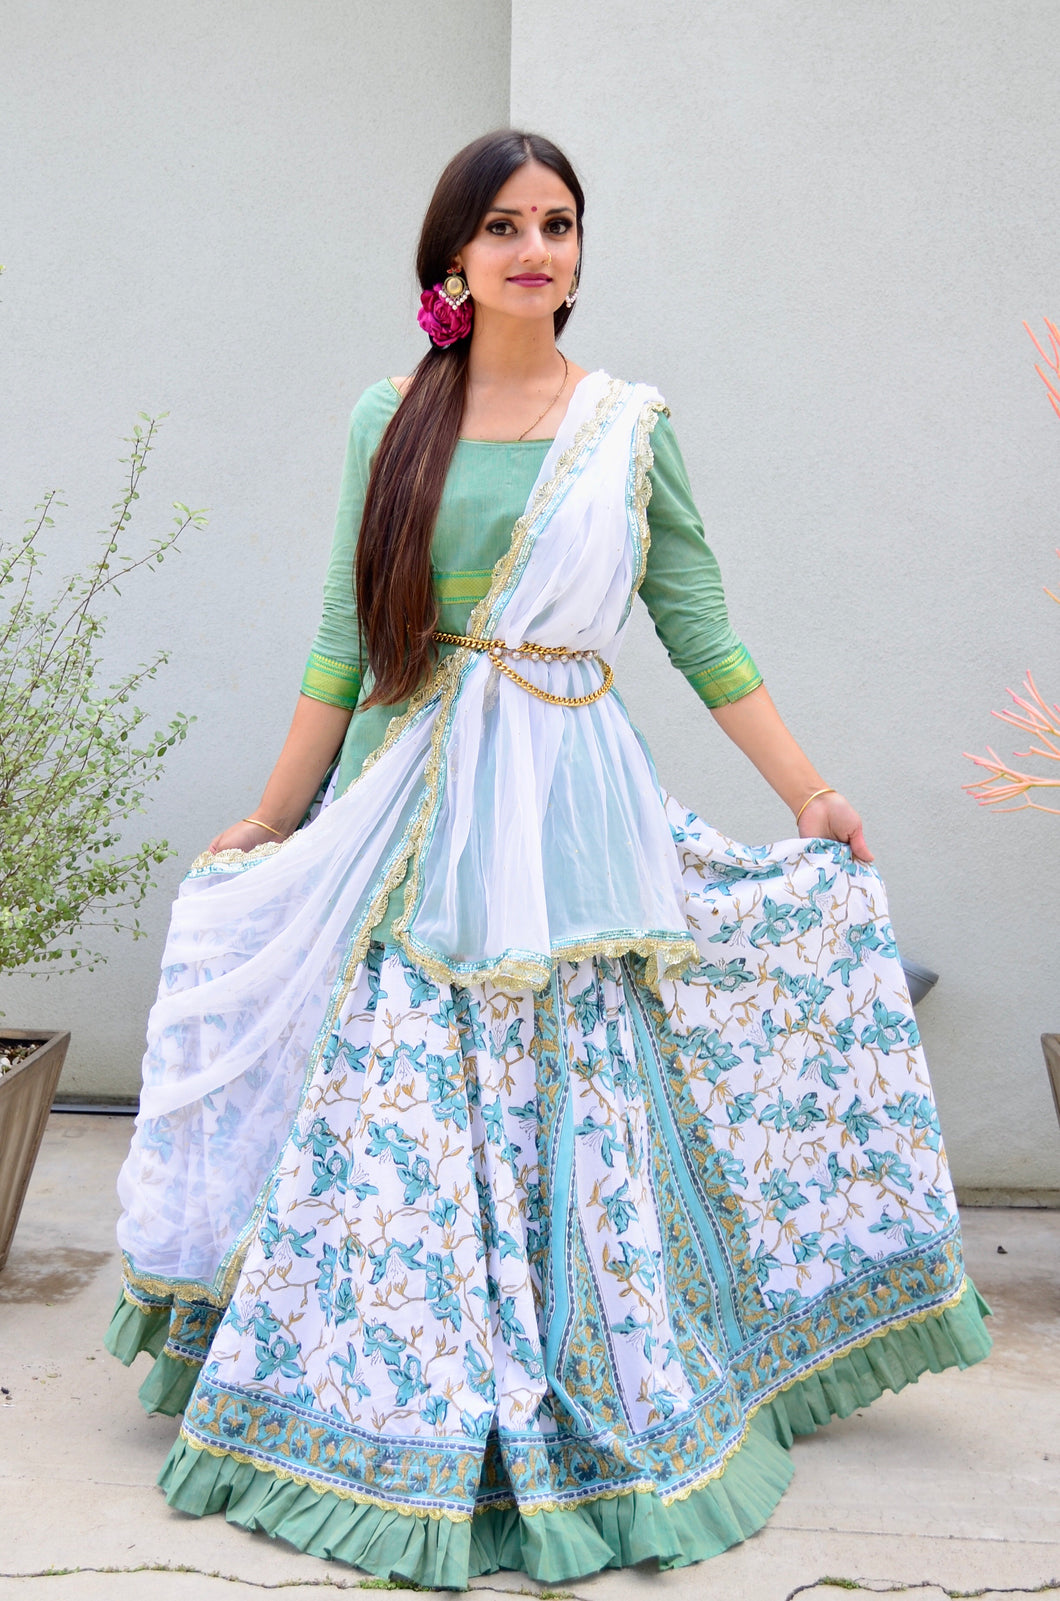 Teal Vines With Frills - Gopi Skirt Outfit